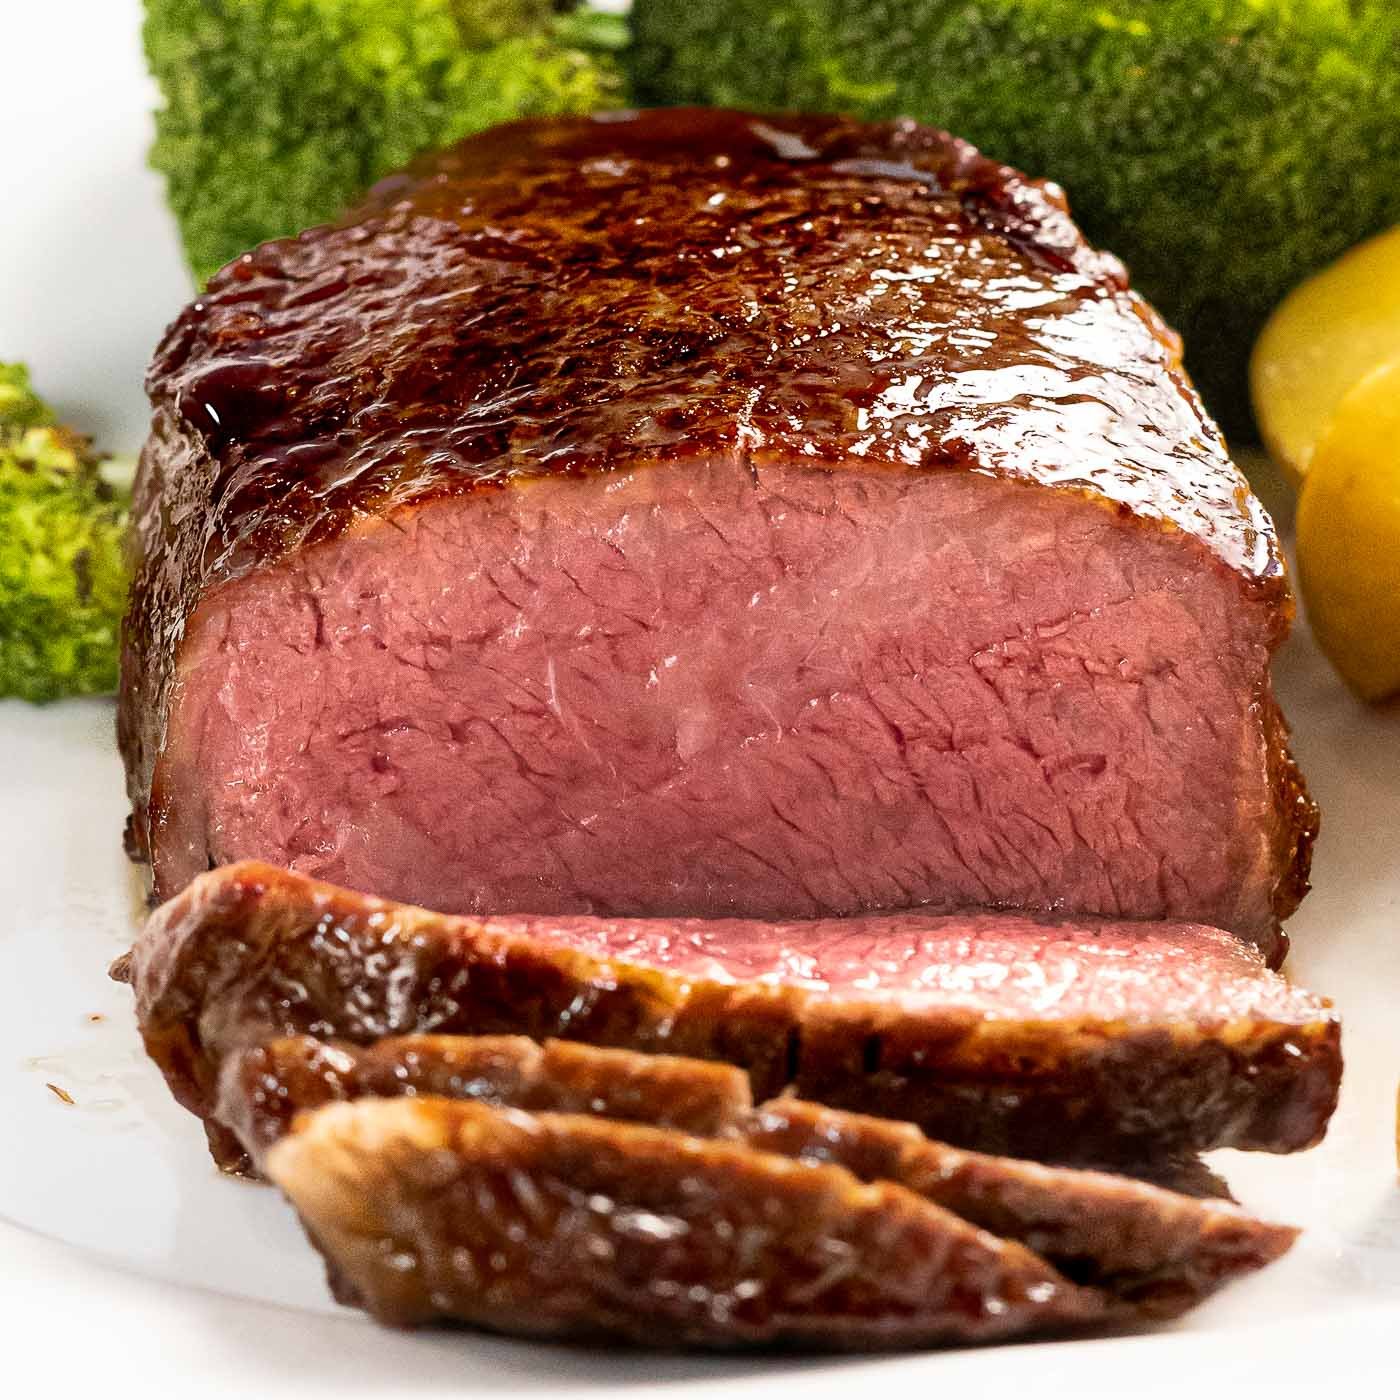 Reverse sear steak perfectly baked and seared with a brown, crispy crust.